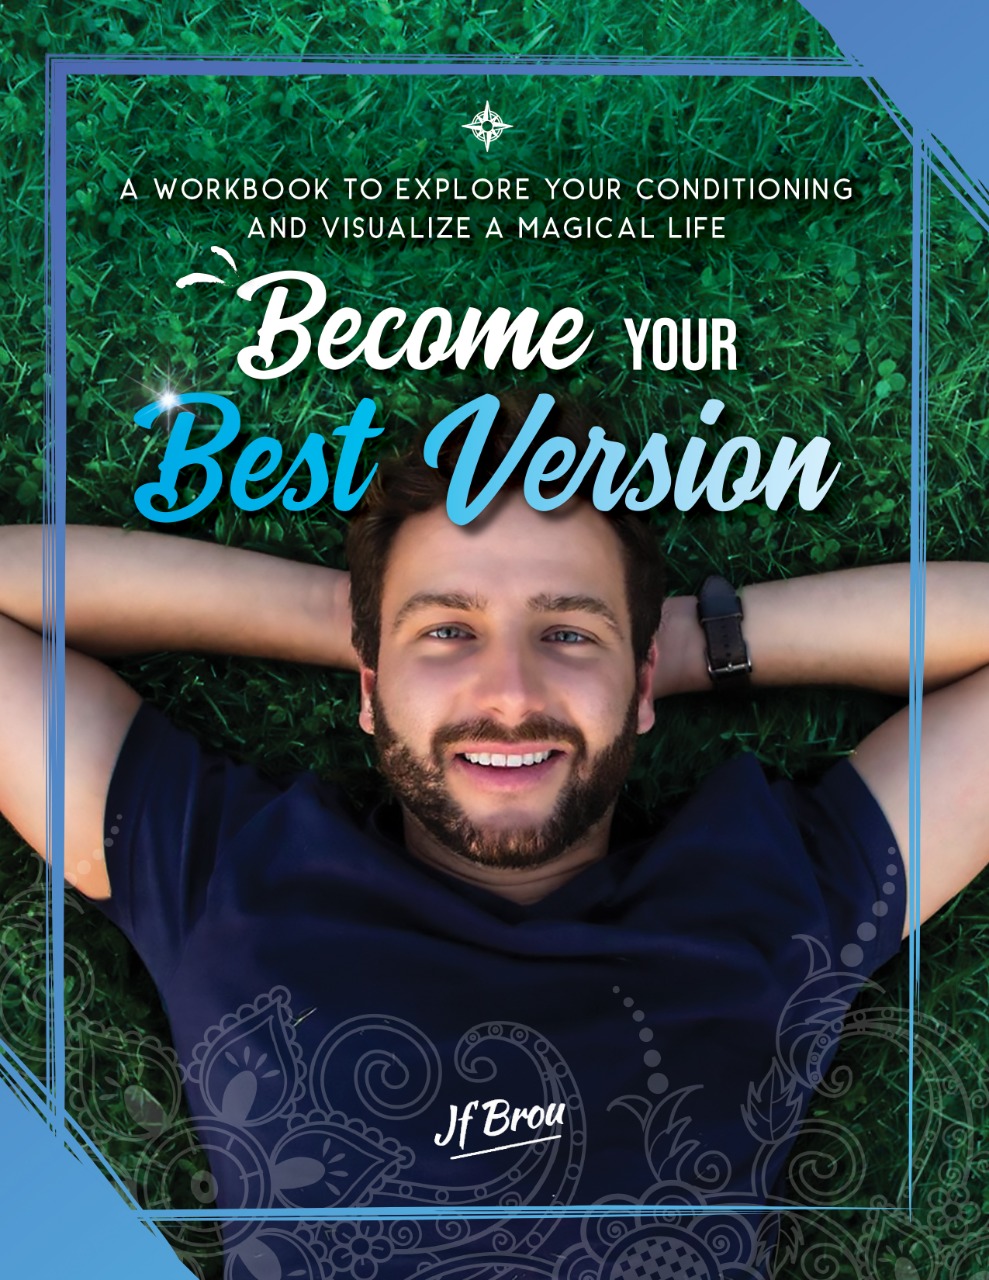 FREE: Become Your Best Version by Jf Brou